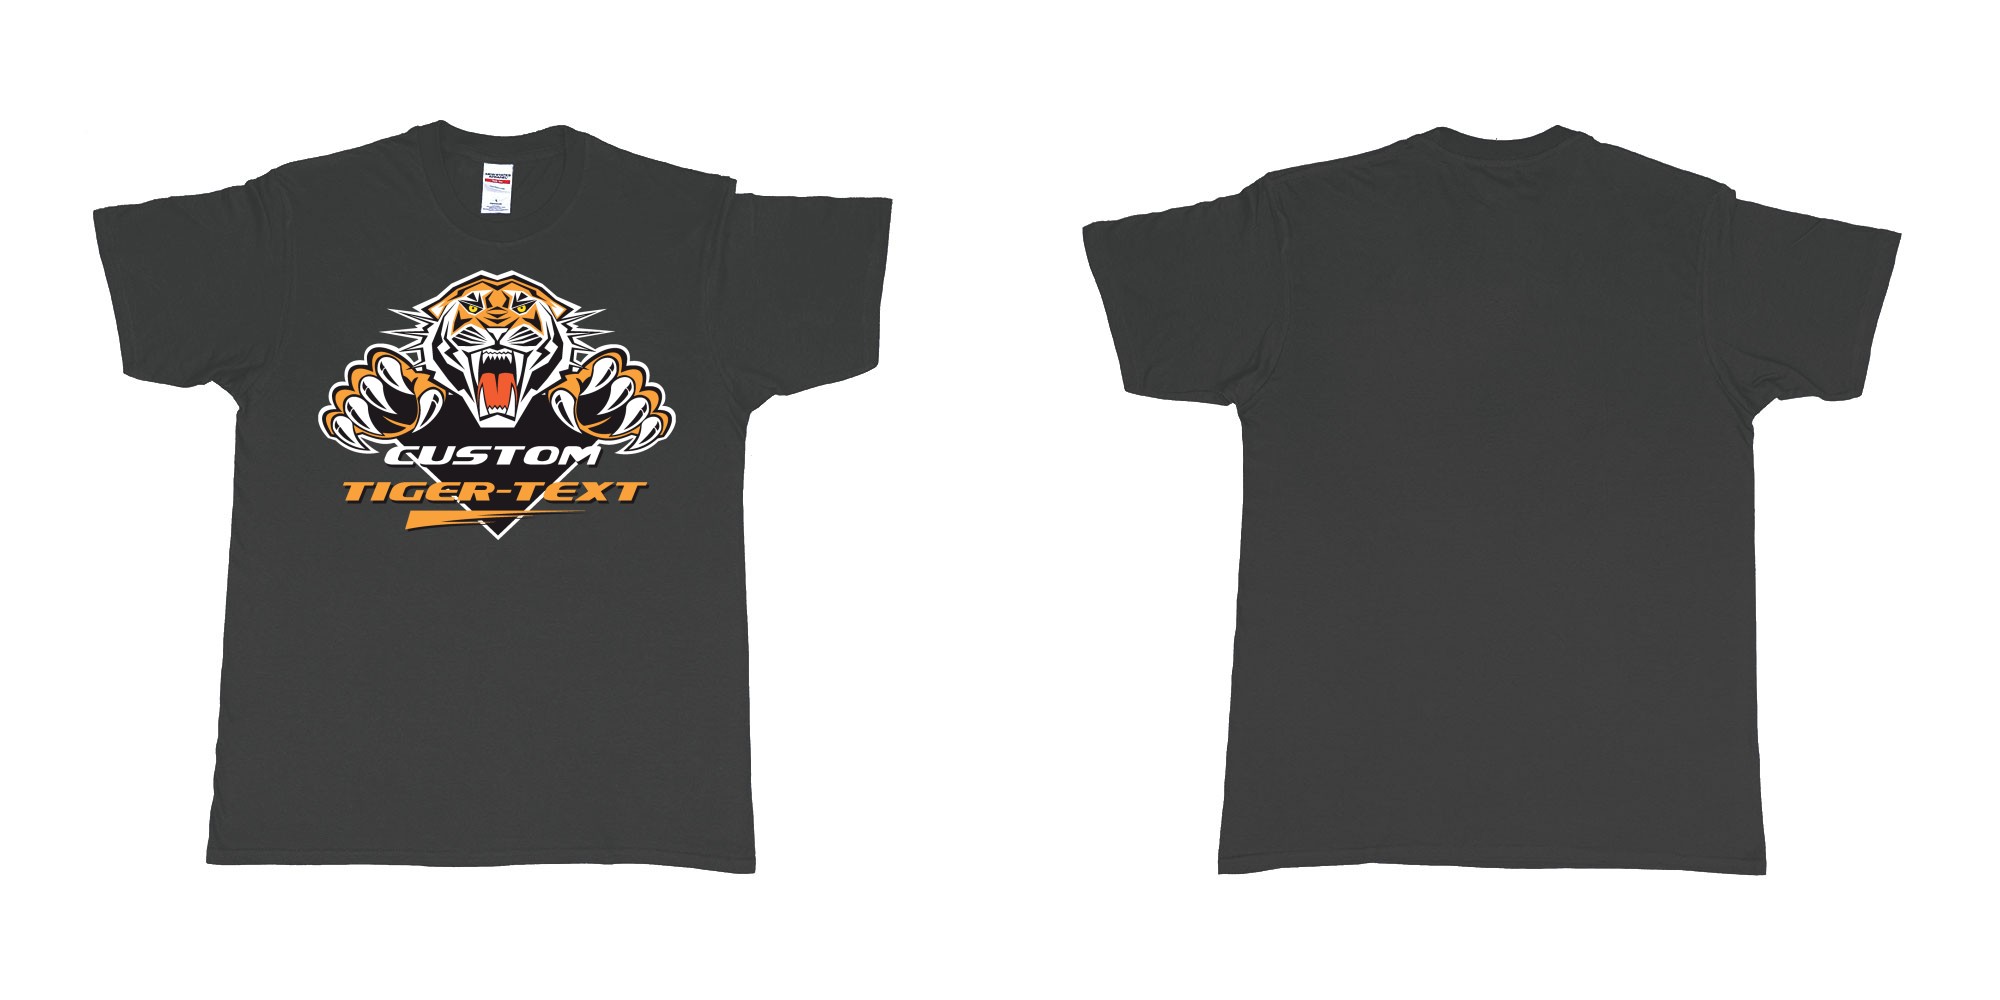 Custom tshirt design the wests tigers sydney national rugby league custom tshirt print in fabric color black choice your own text made in Bali by The Pirate Way